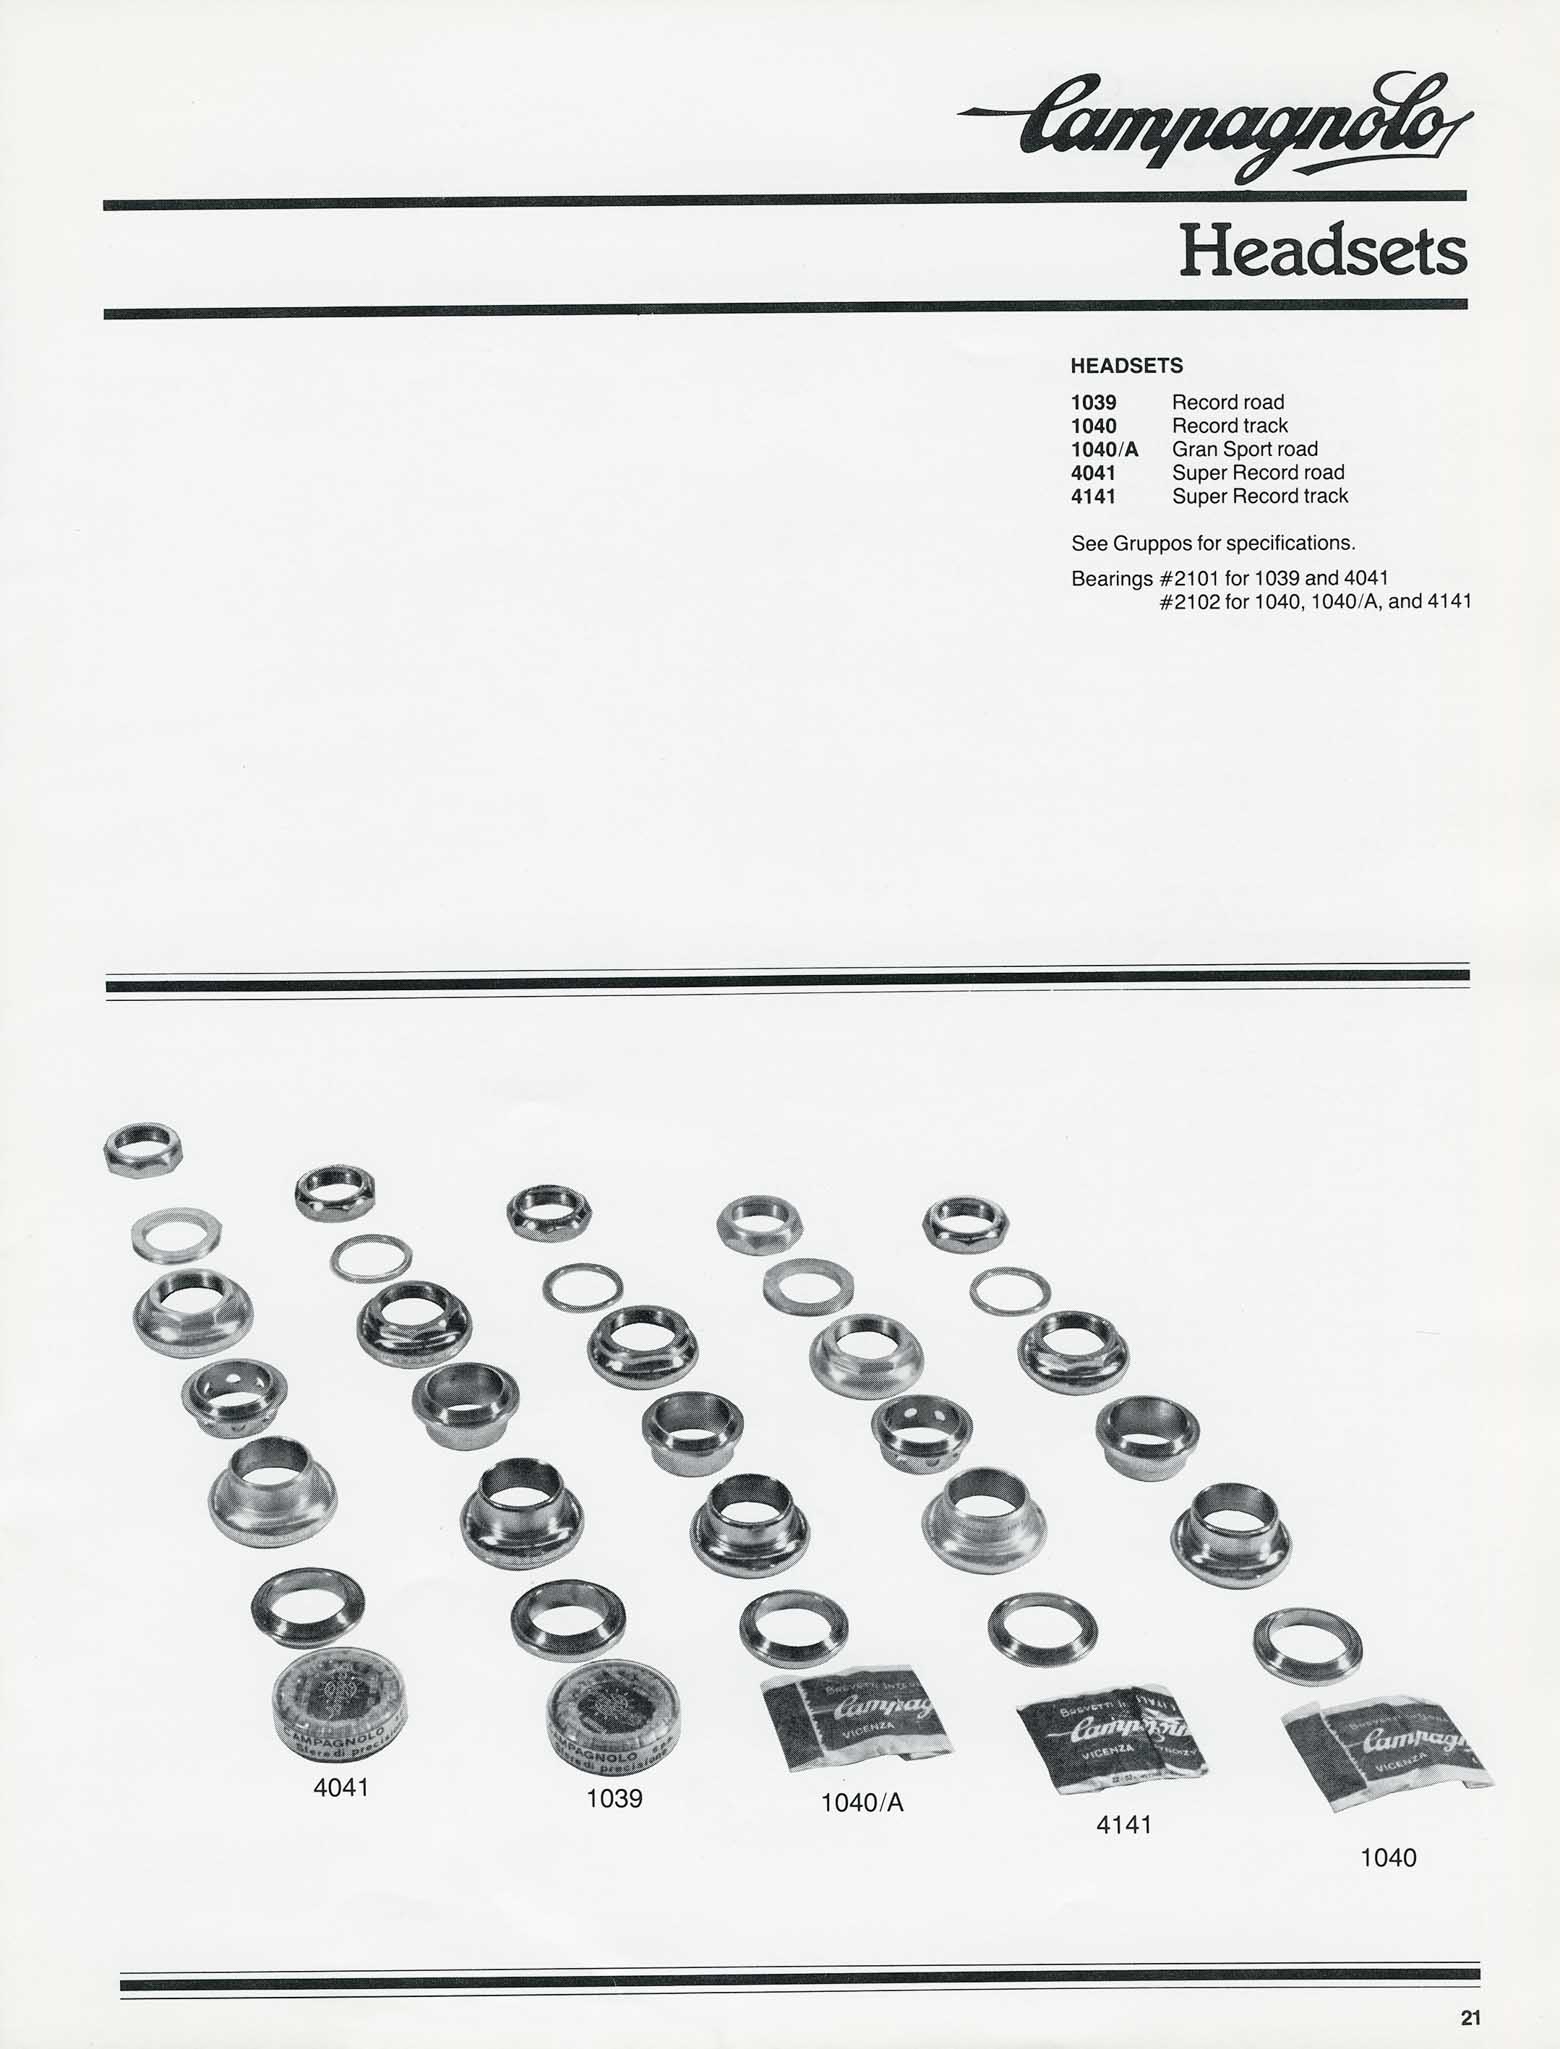 Campagnolo - Bicycle Components 1982 page 21 main image